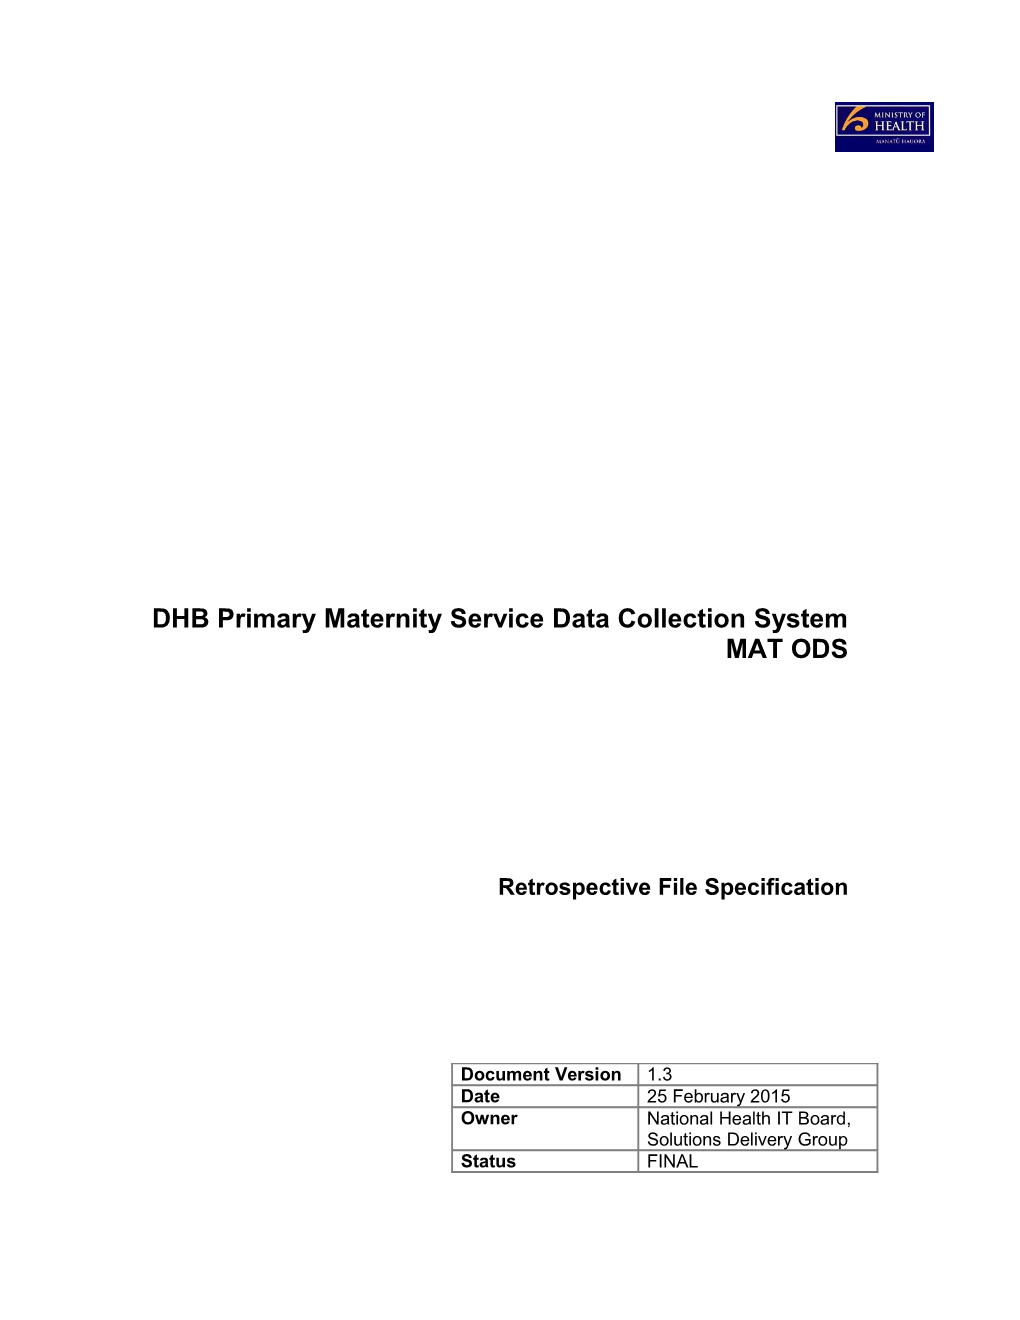 DHB Primary Maternity Service Data Collection System MAT ODS